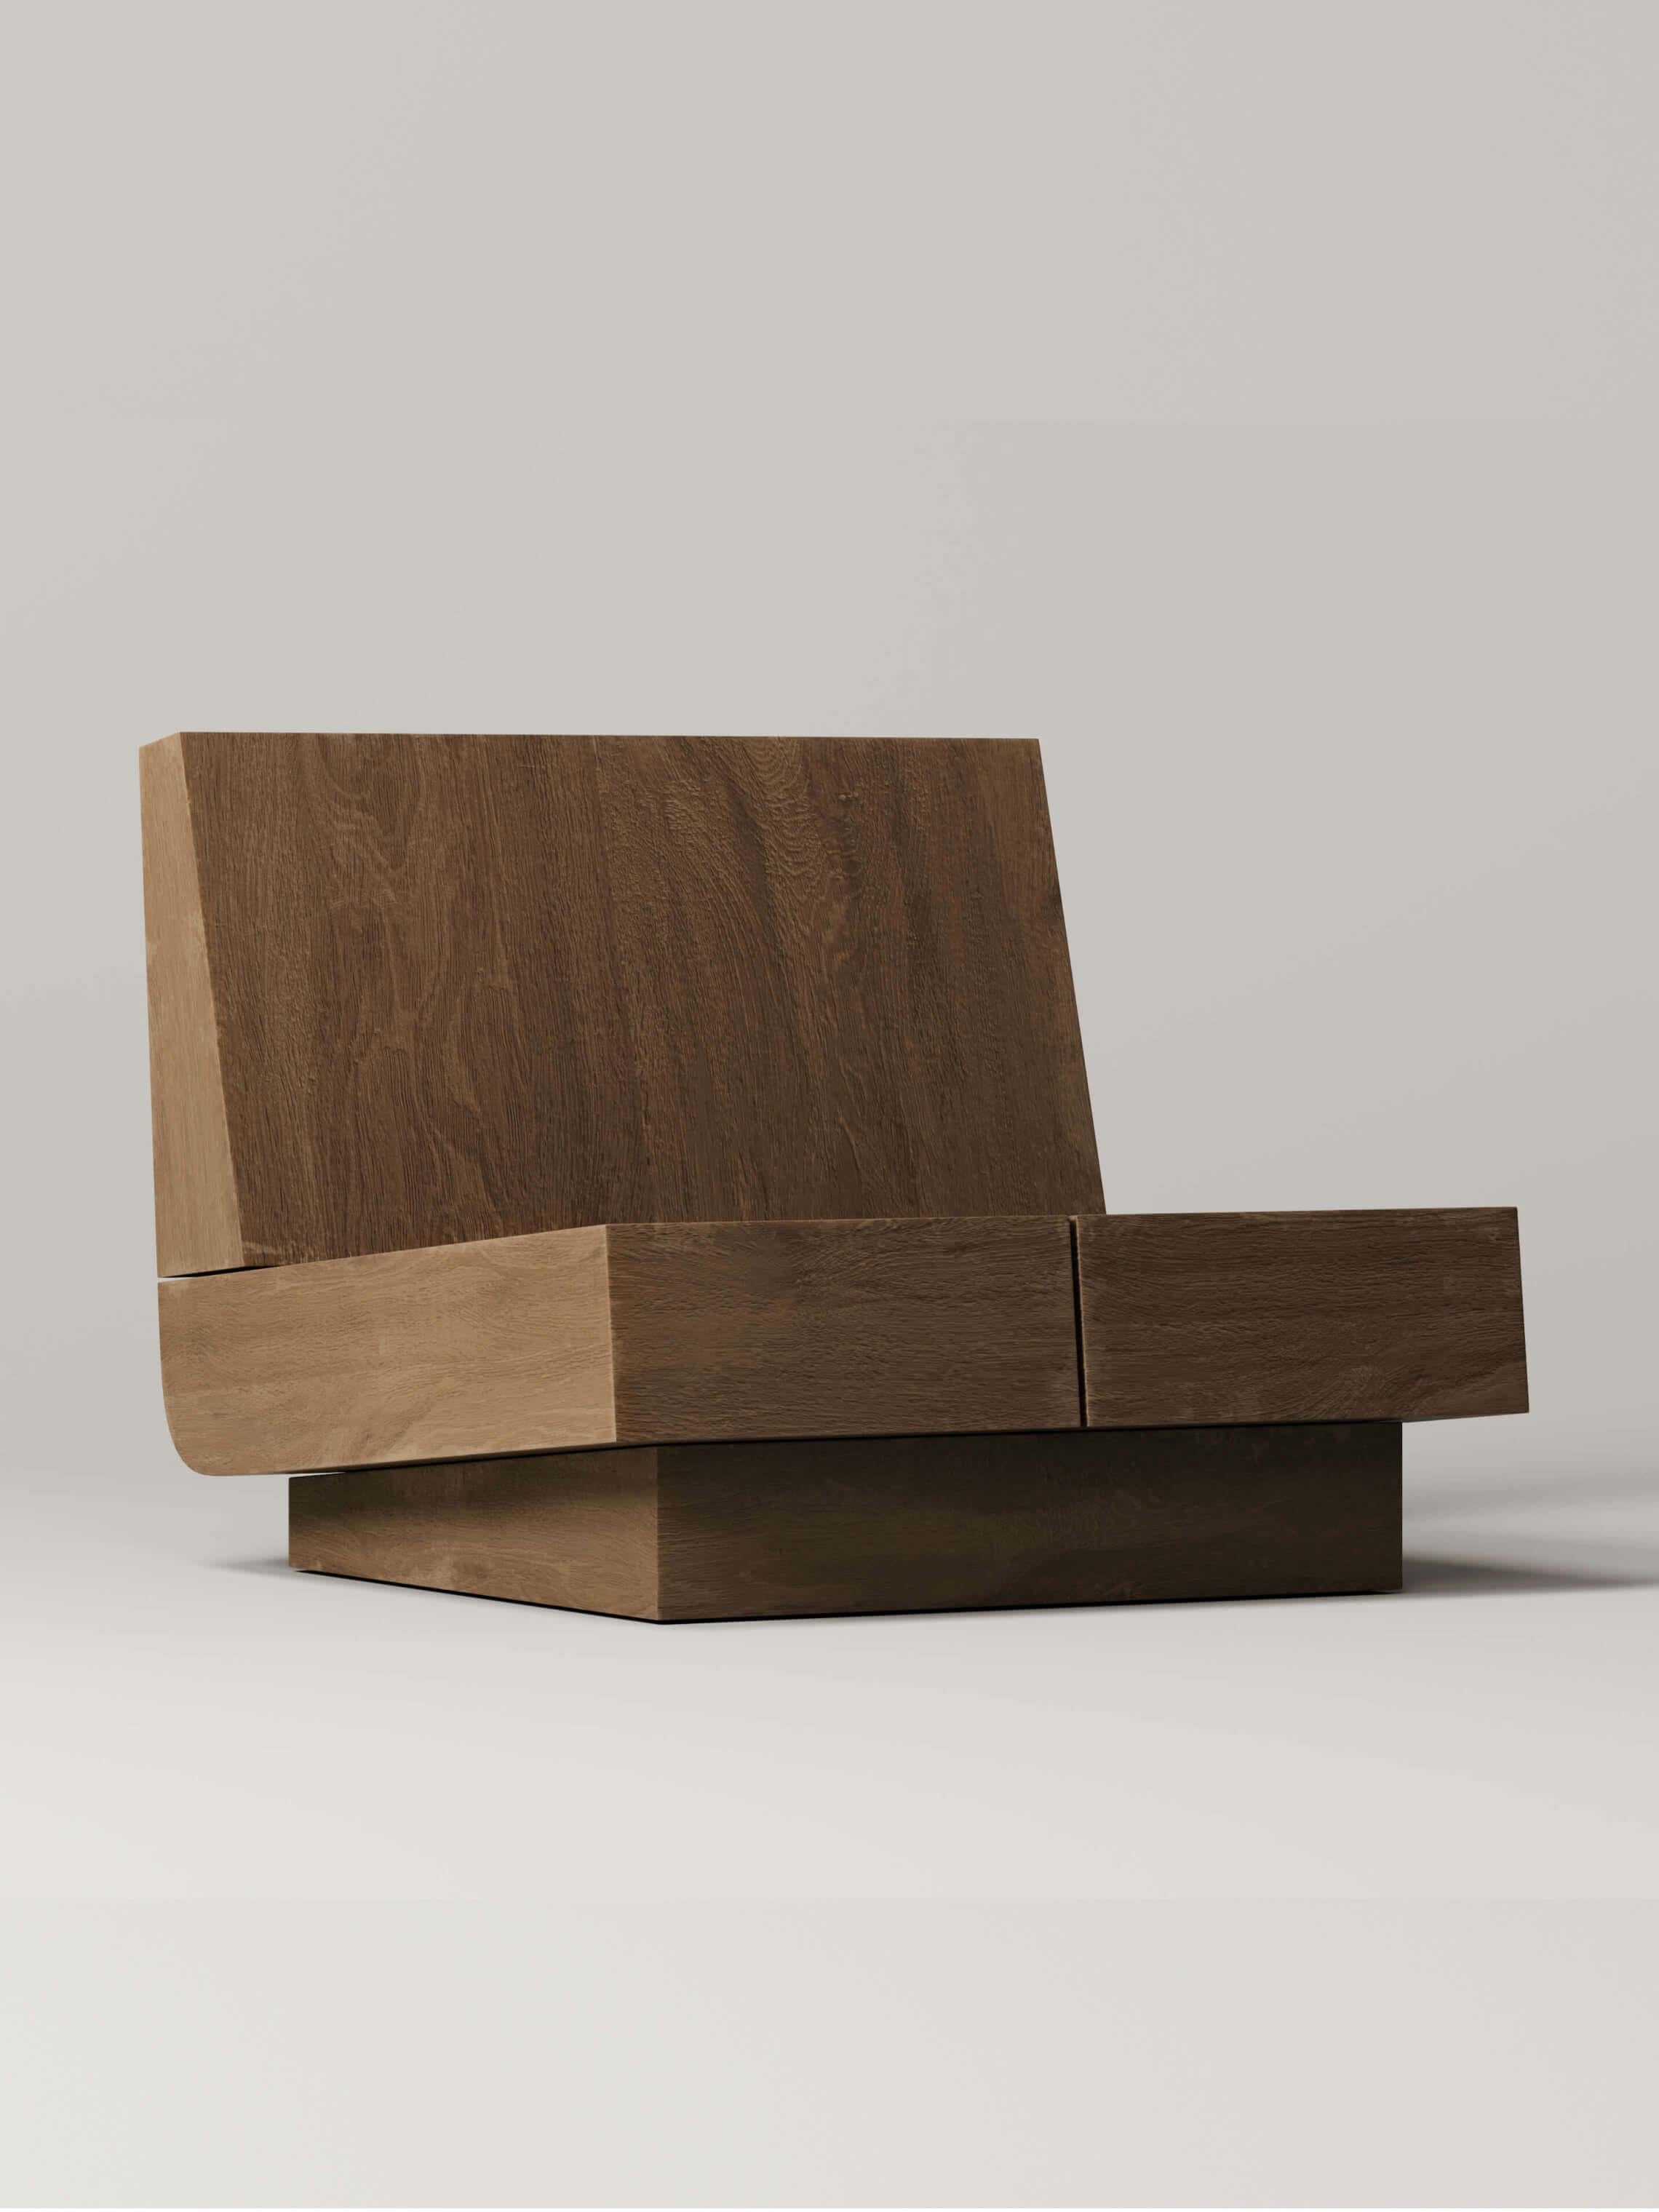 M_007 Oak Lounge Chair by Monolith Studio
Signed and Numbered.
Dimensions: D 70 x W 66 x H 60 cm.
Materials: Oak. 

Available in travertine, walnut, white oak and lava rock.  Please contact us. 

Monolith, founded in 2022 by Marc Personick, leans on